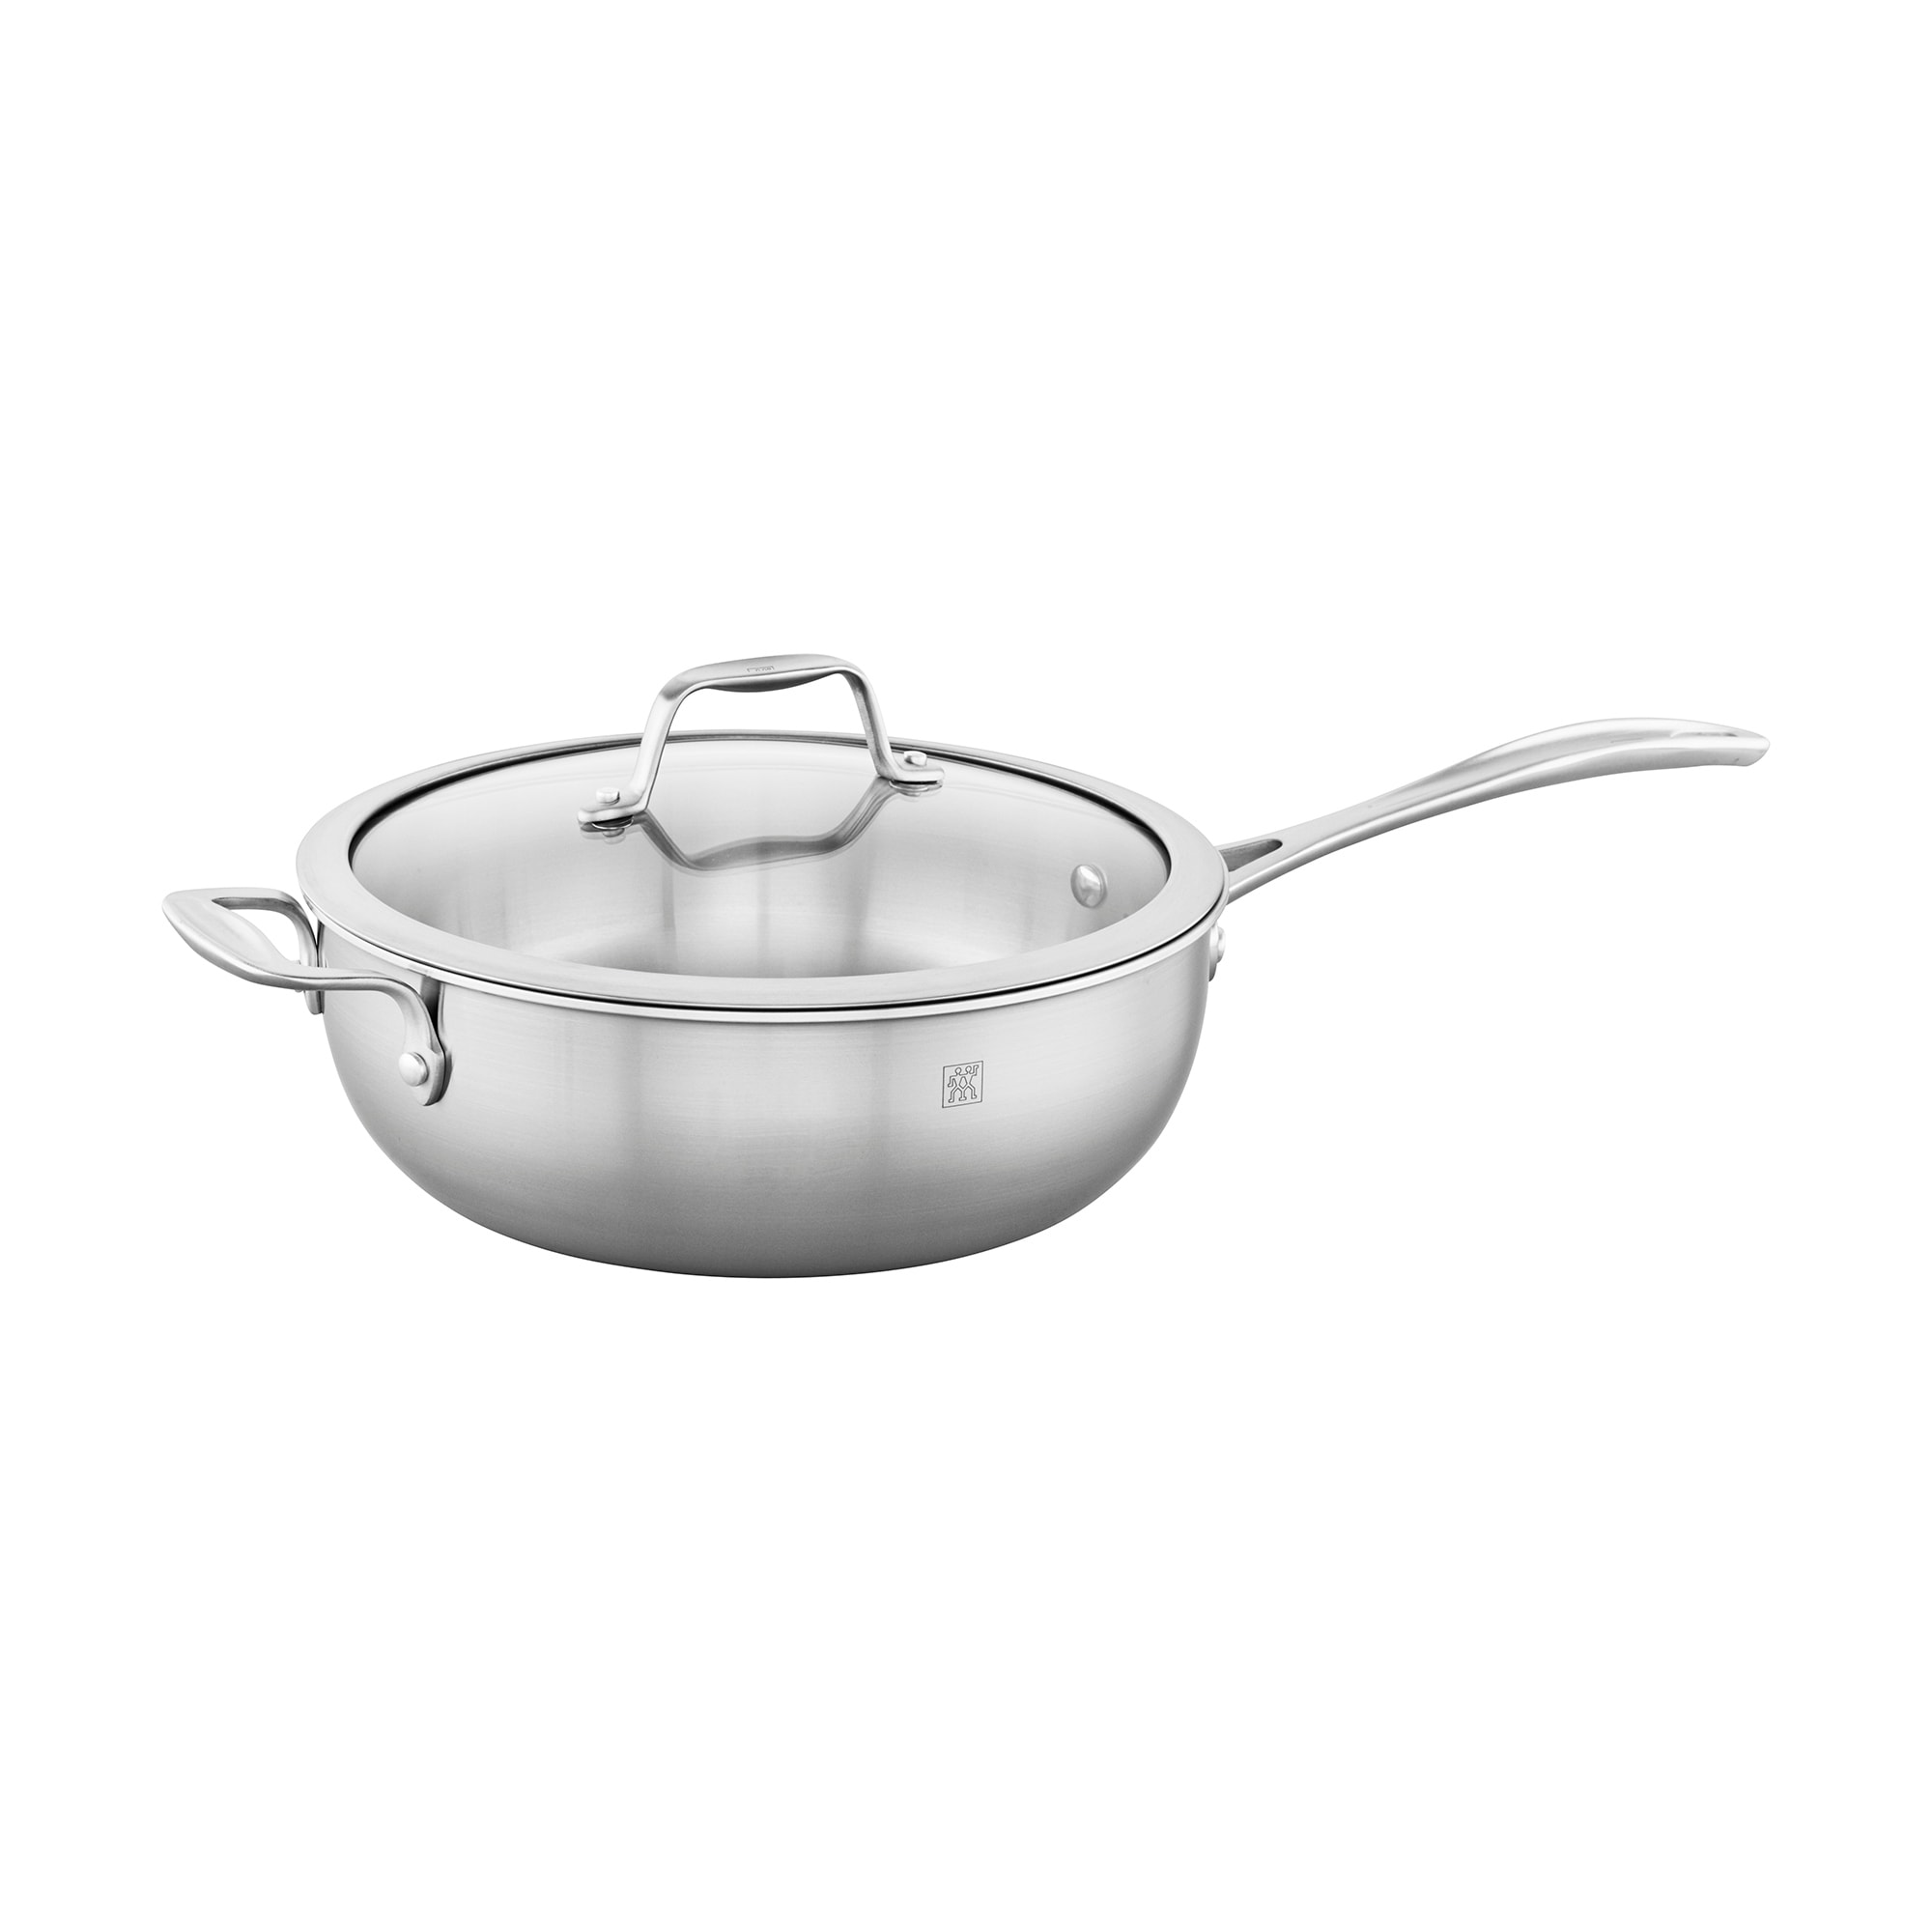 https://ak1.ostkcdn.com/images/products/is/images/direct/7f6c43c5d65b803552824ced942eaf1fda7f8922/ZWILLING-Spirit-3-ply-4.6-qt-Stainless-Steel-Perfect-Pan.jpg